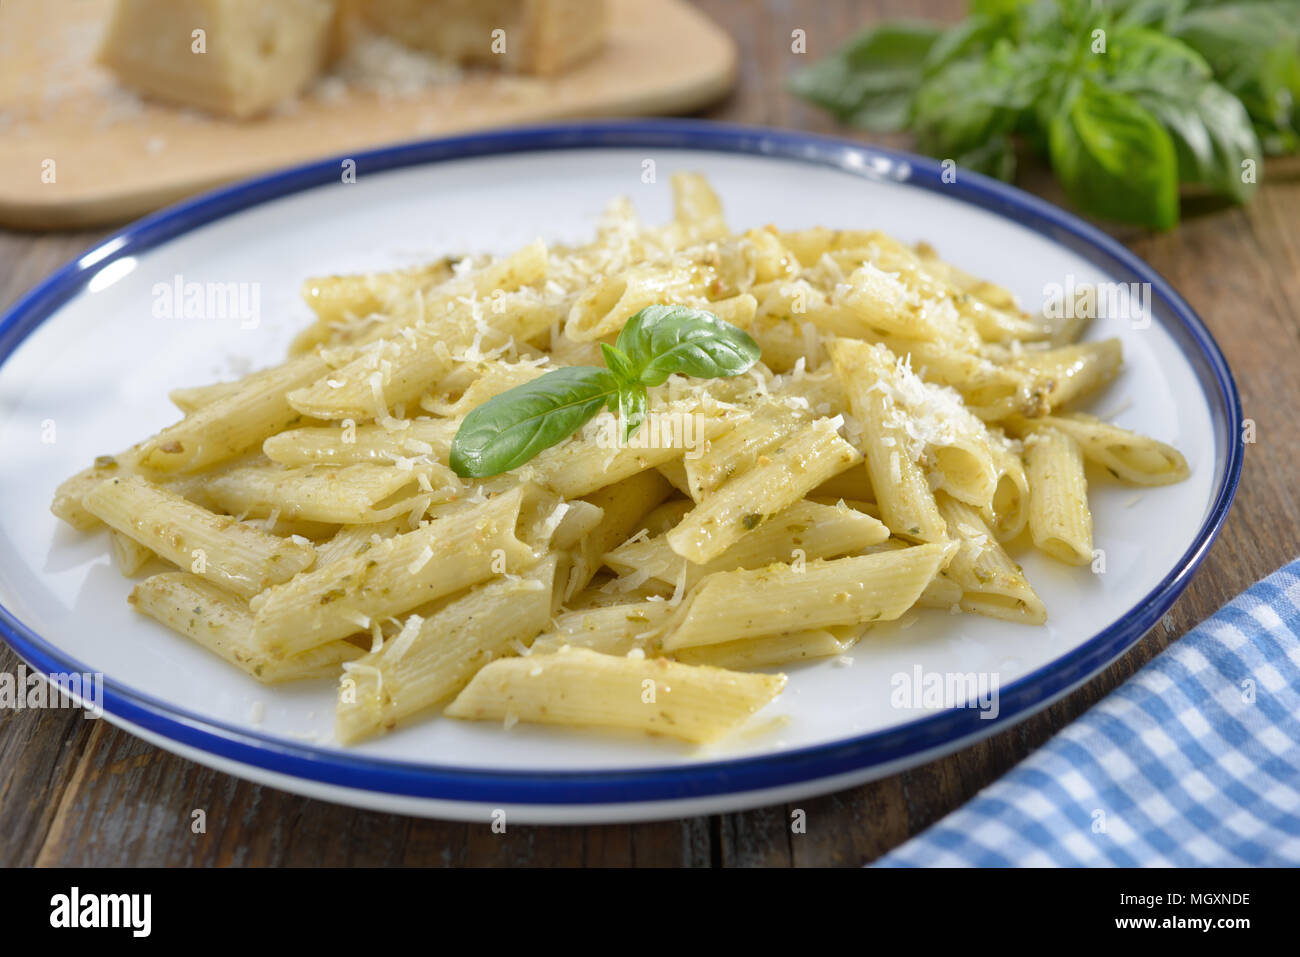 Macaroni with Parmesan cheese and basil leaf Stock Photo